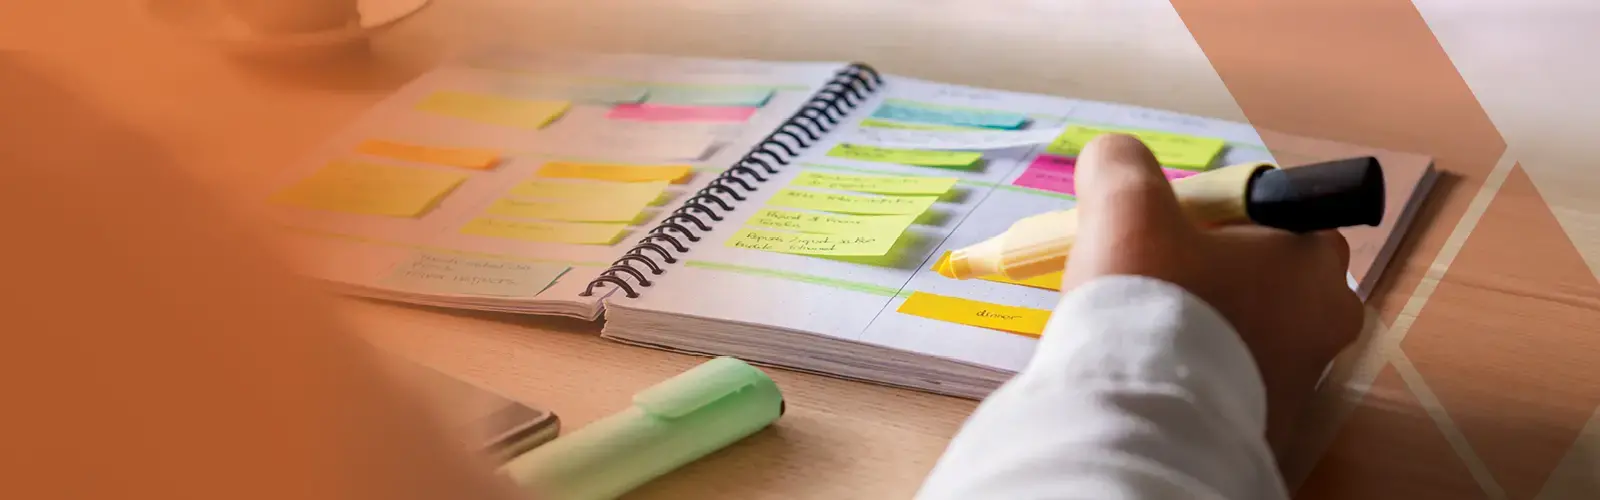 Agenda organized with color-coding stick for time management 